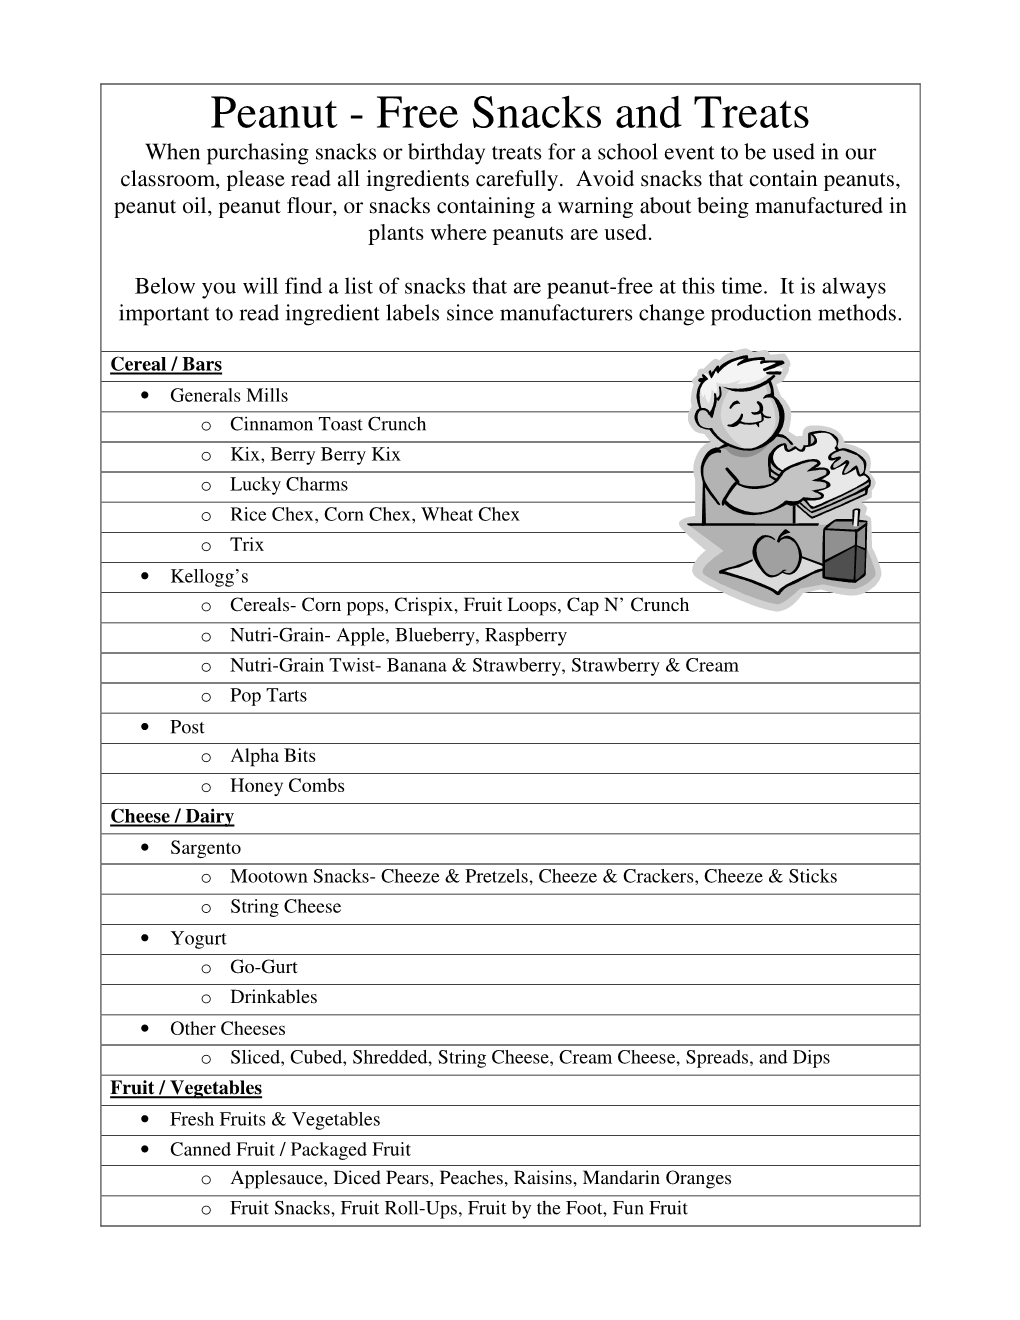 Peanut - Free Snacks and Treats When Purchasing Snacks Or Birthday Treats for a School Event to Be Used in Our Classroom, Please Read All Ingredients Carefully